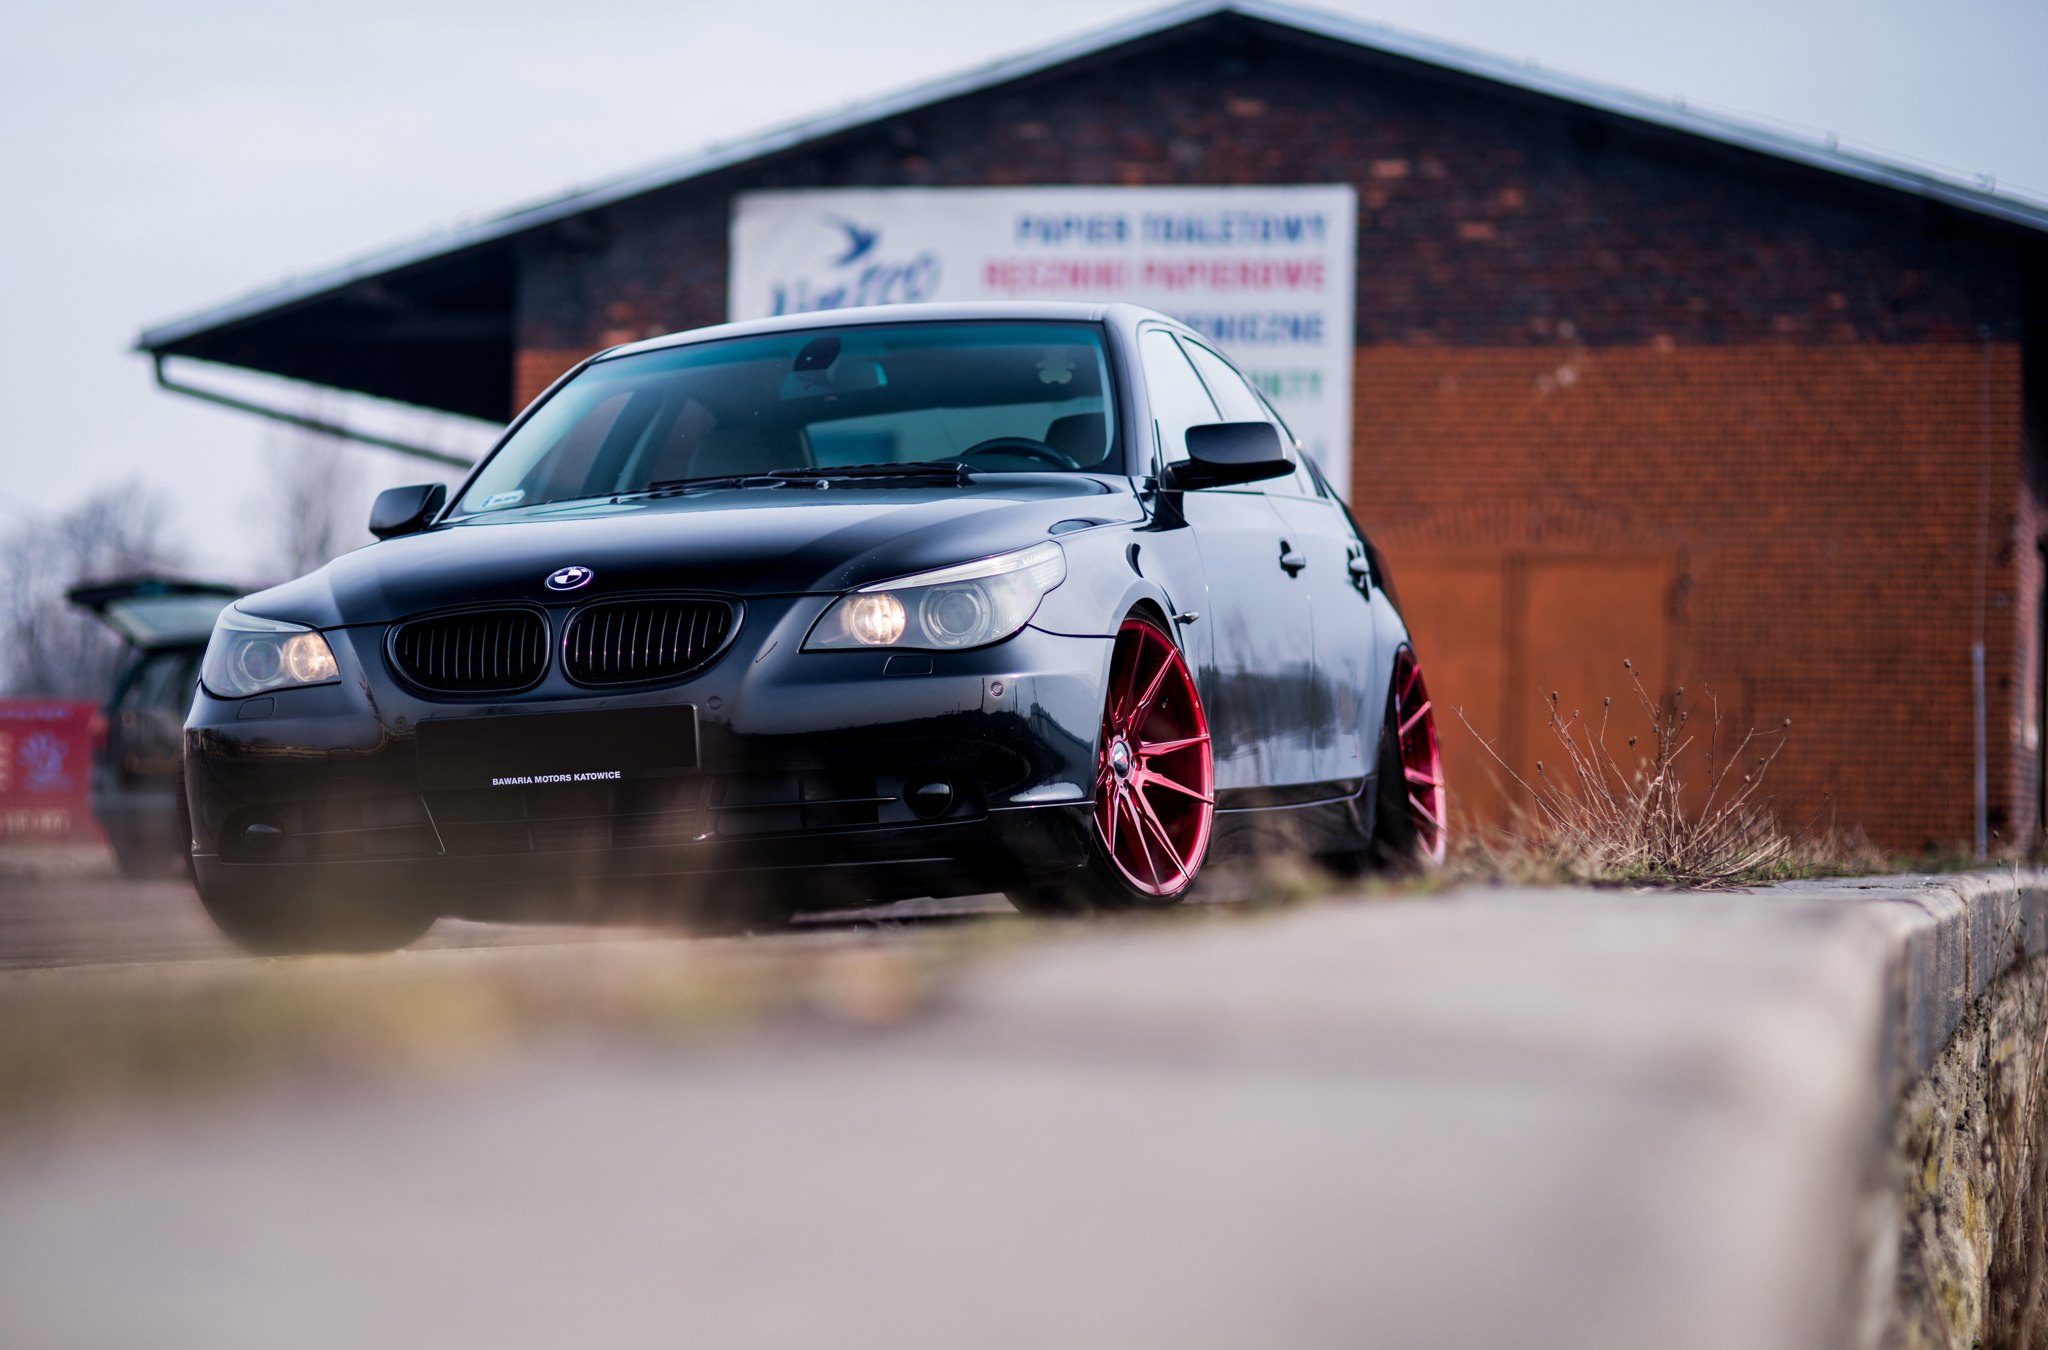 Aftermarket Front Bumper on Black BMW 5-Series - Photo by JR Wheels